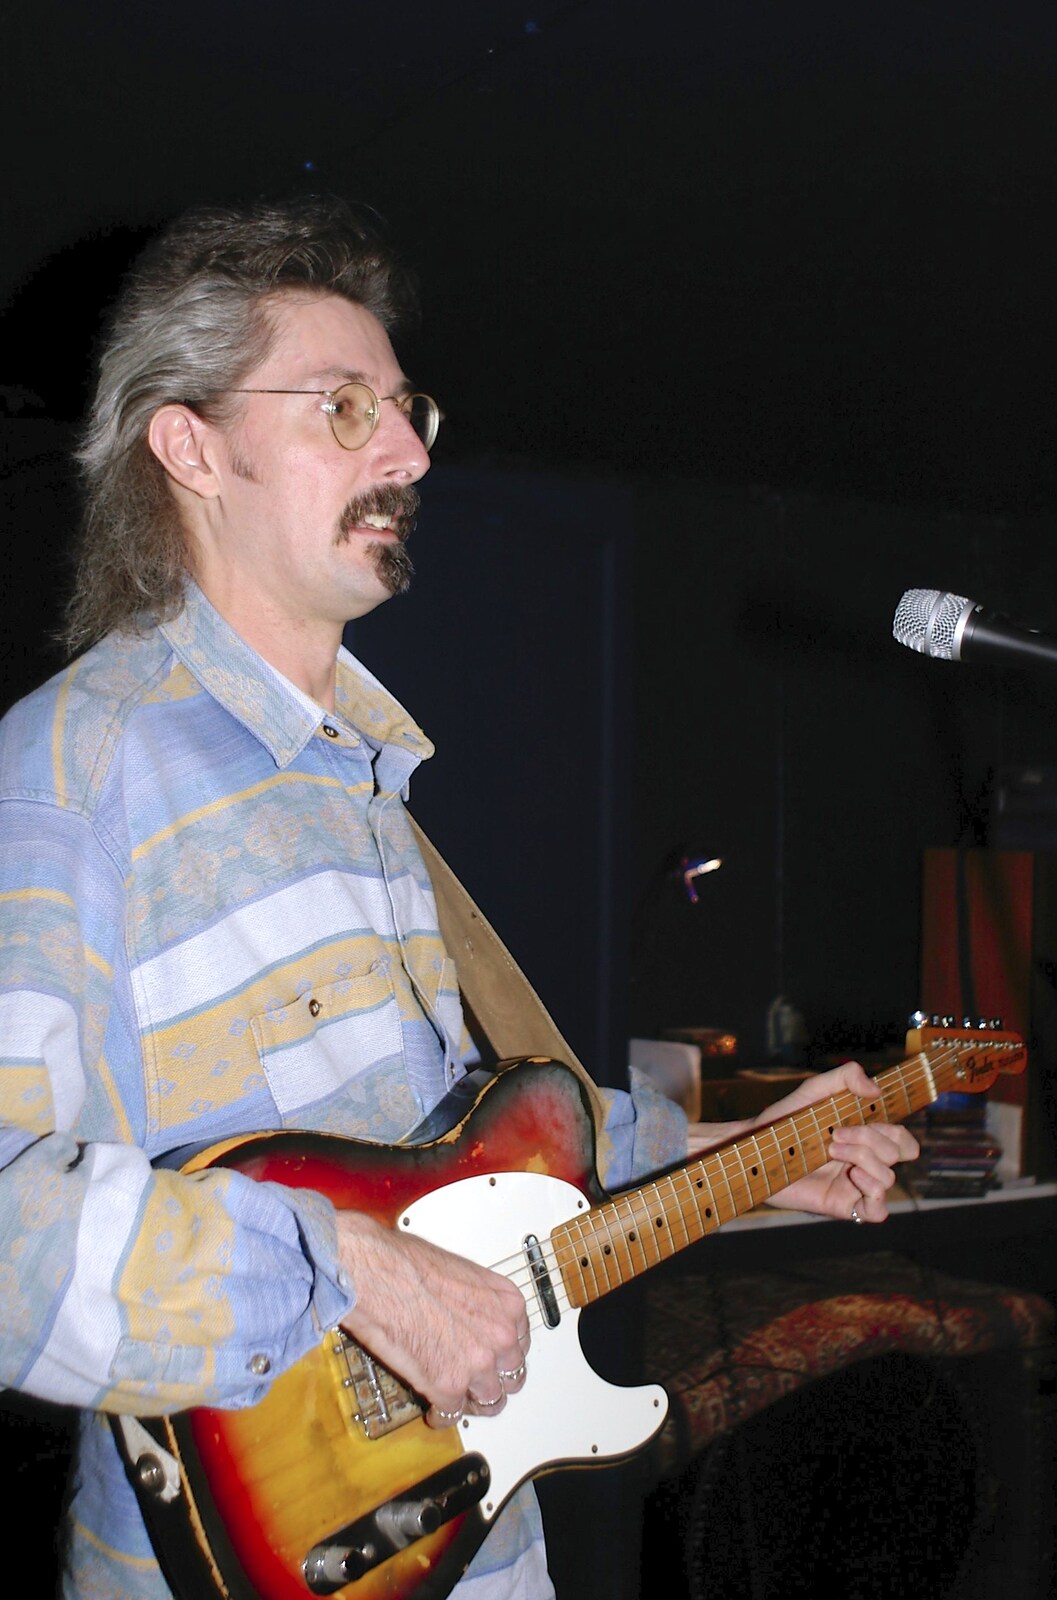 The BBs Rehearse and the WI Market, Diss, Norfolk - 9th November 2004: Rob twangs away on guitar